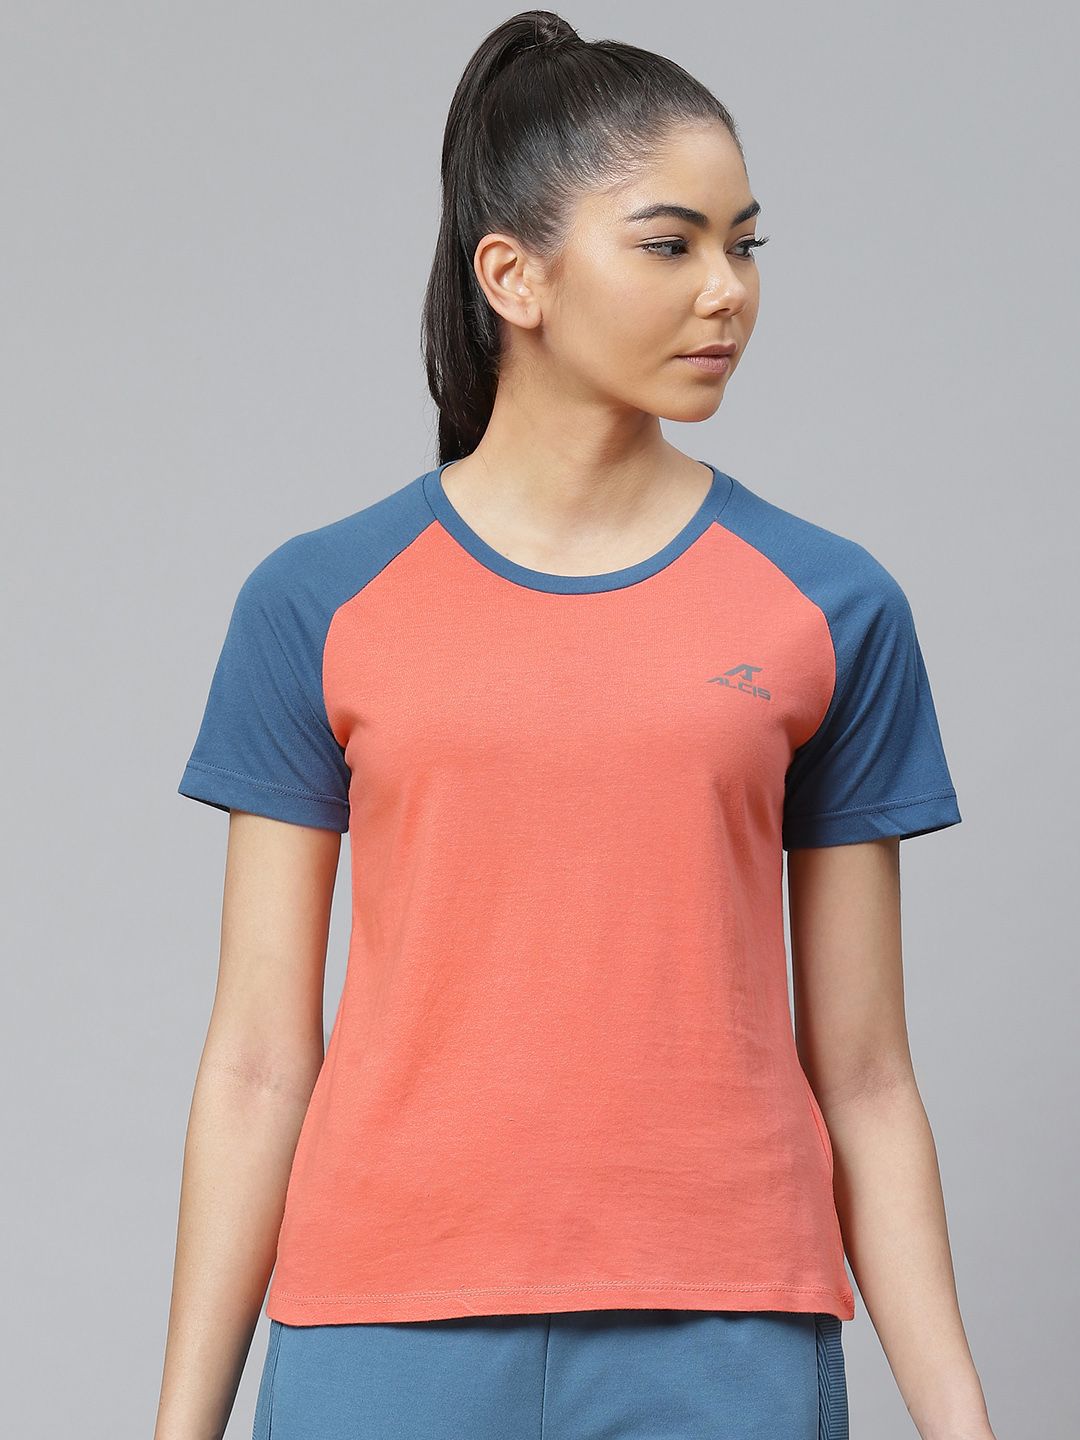 Alcis Women Pink Solid Slim Fit Round Neck T-shirt Price in India